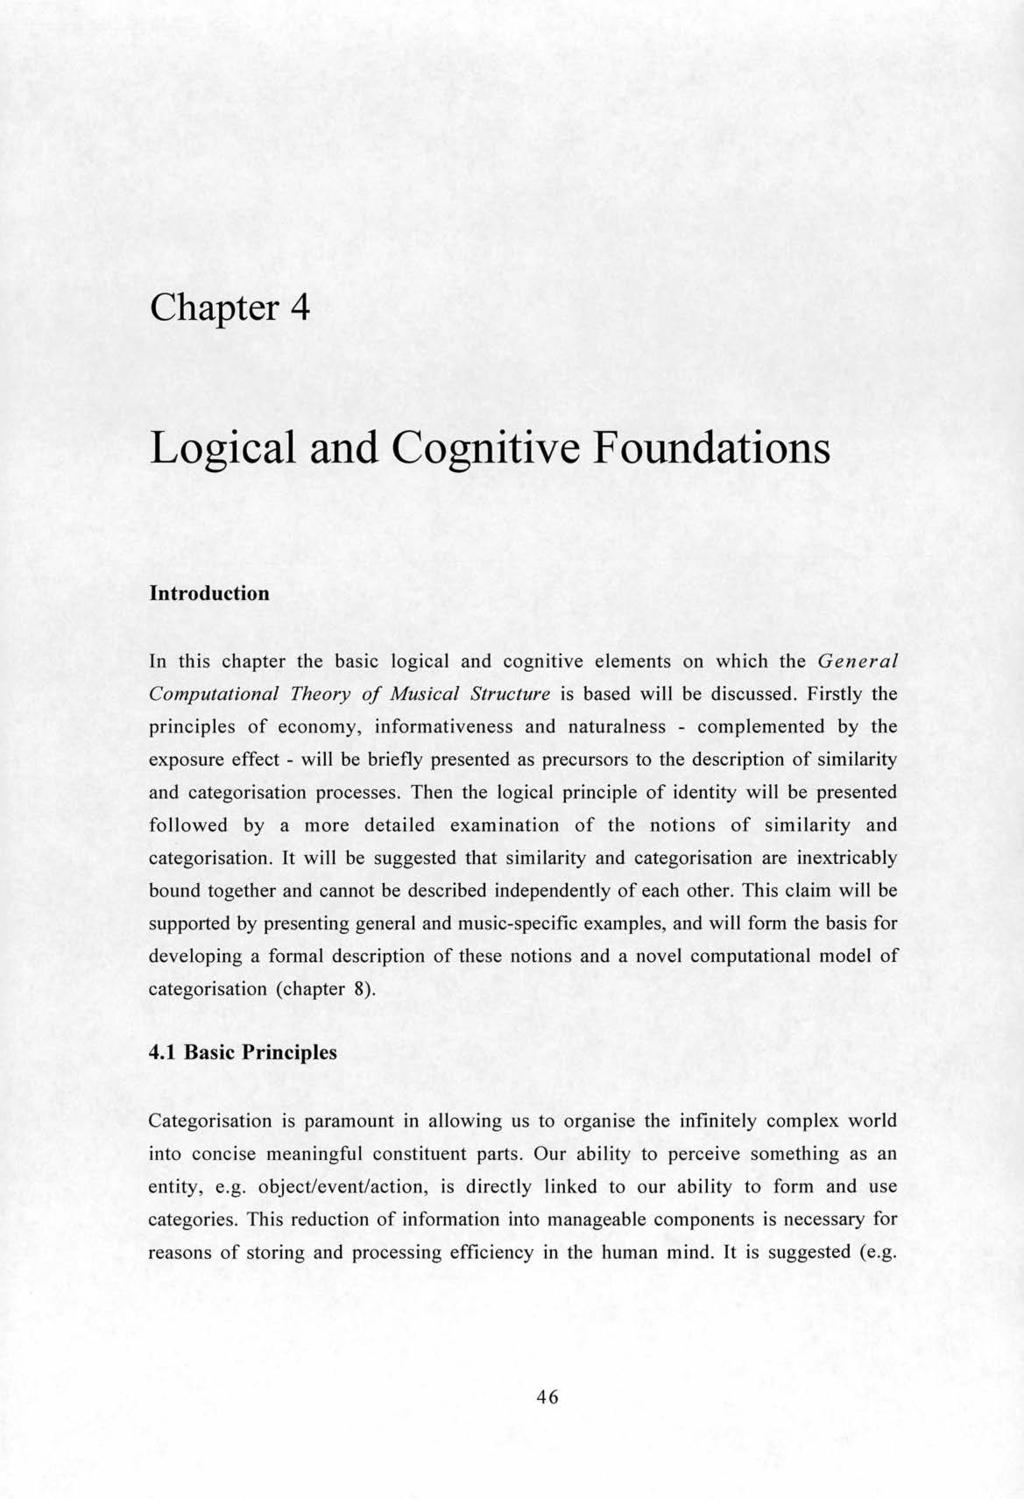 Chapter 4 Logical and Cognitive Foundations Introduction In this chapter the basic logical and cognitive elements on which the General Computational Theory of Musical Structure is based will be